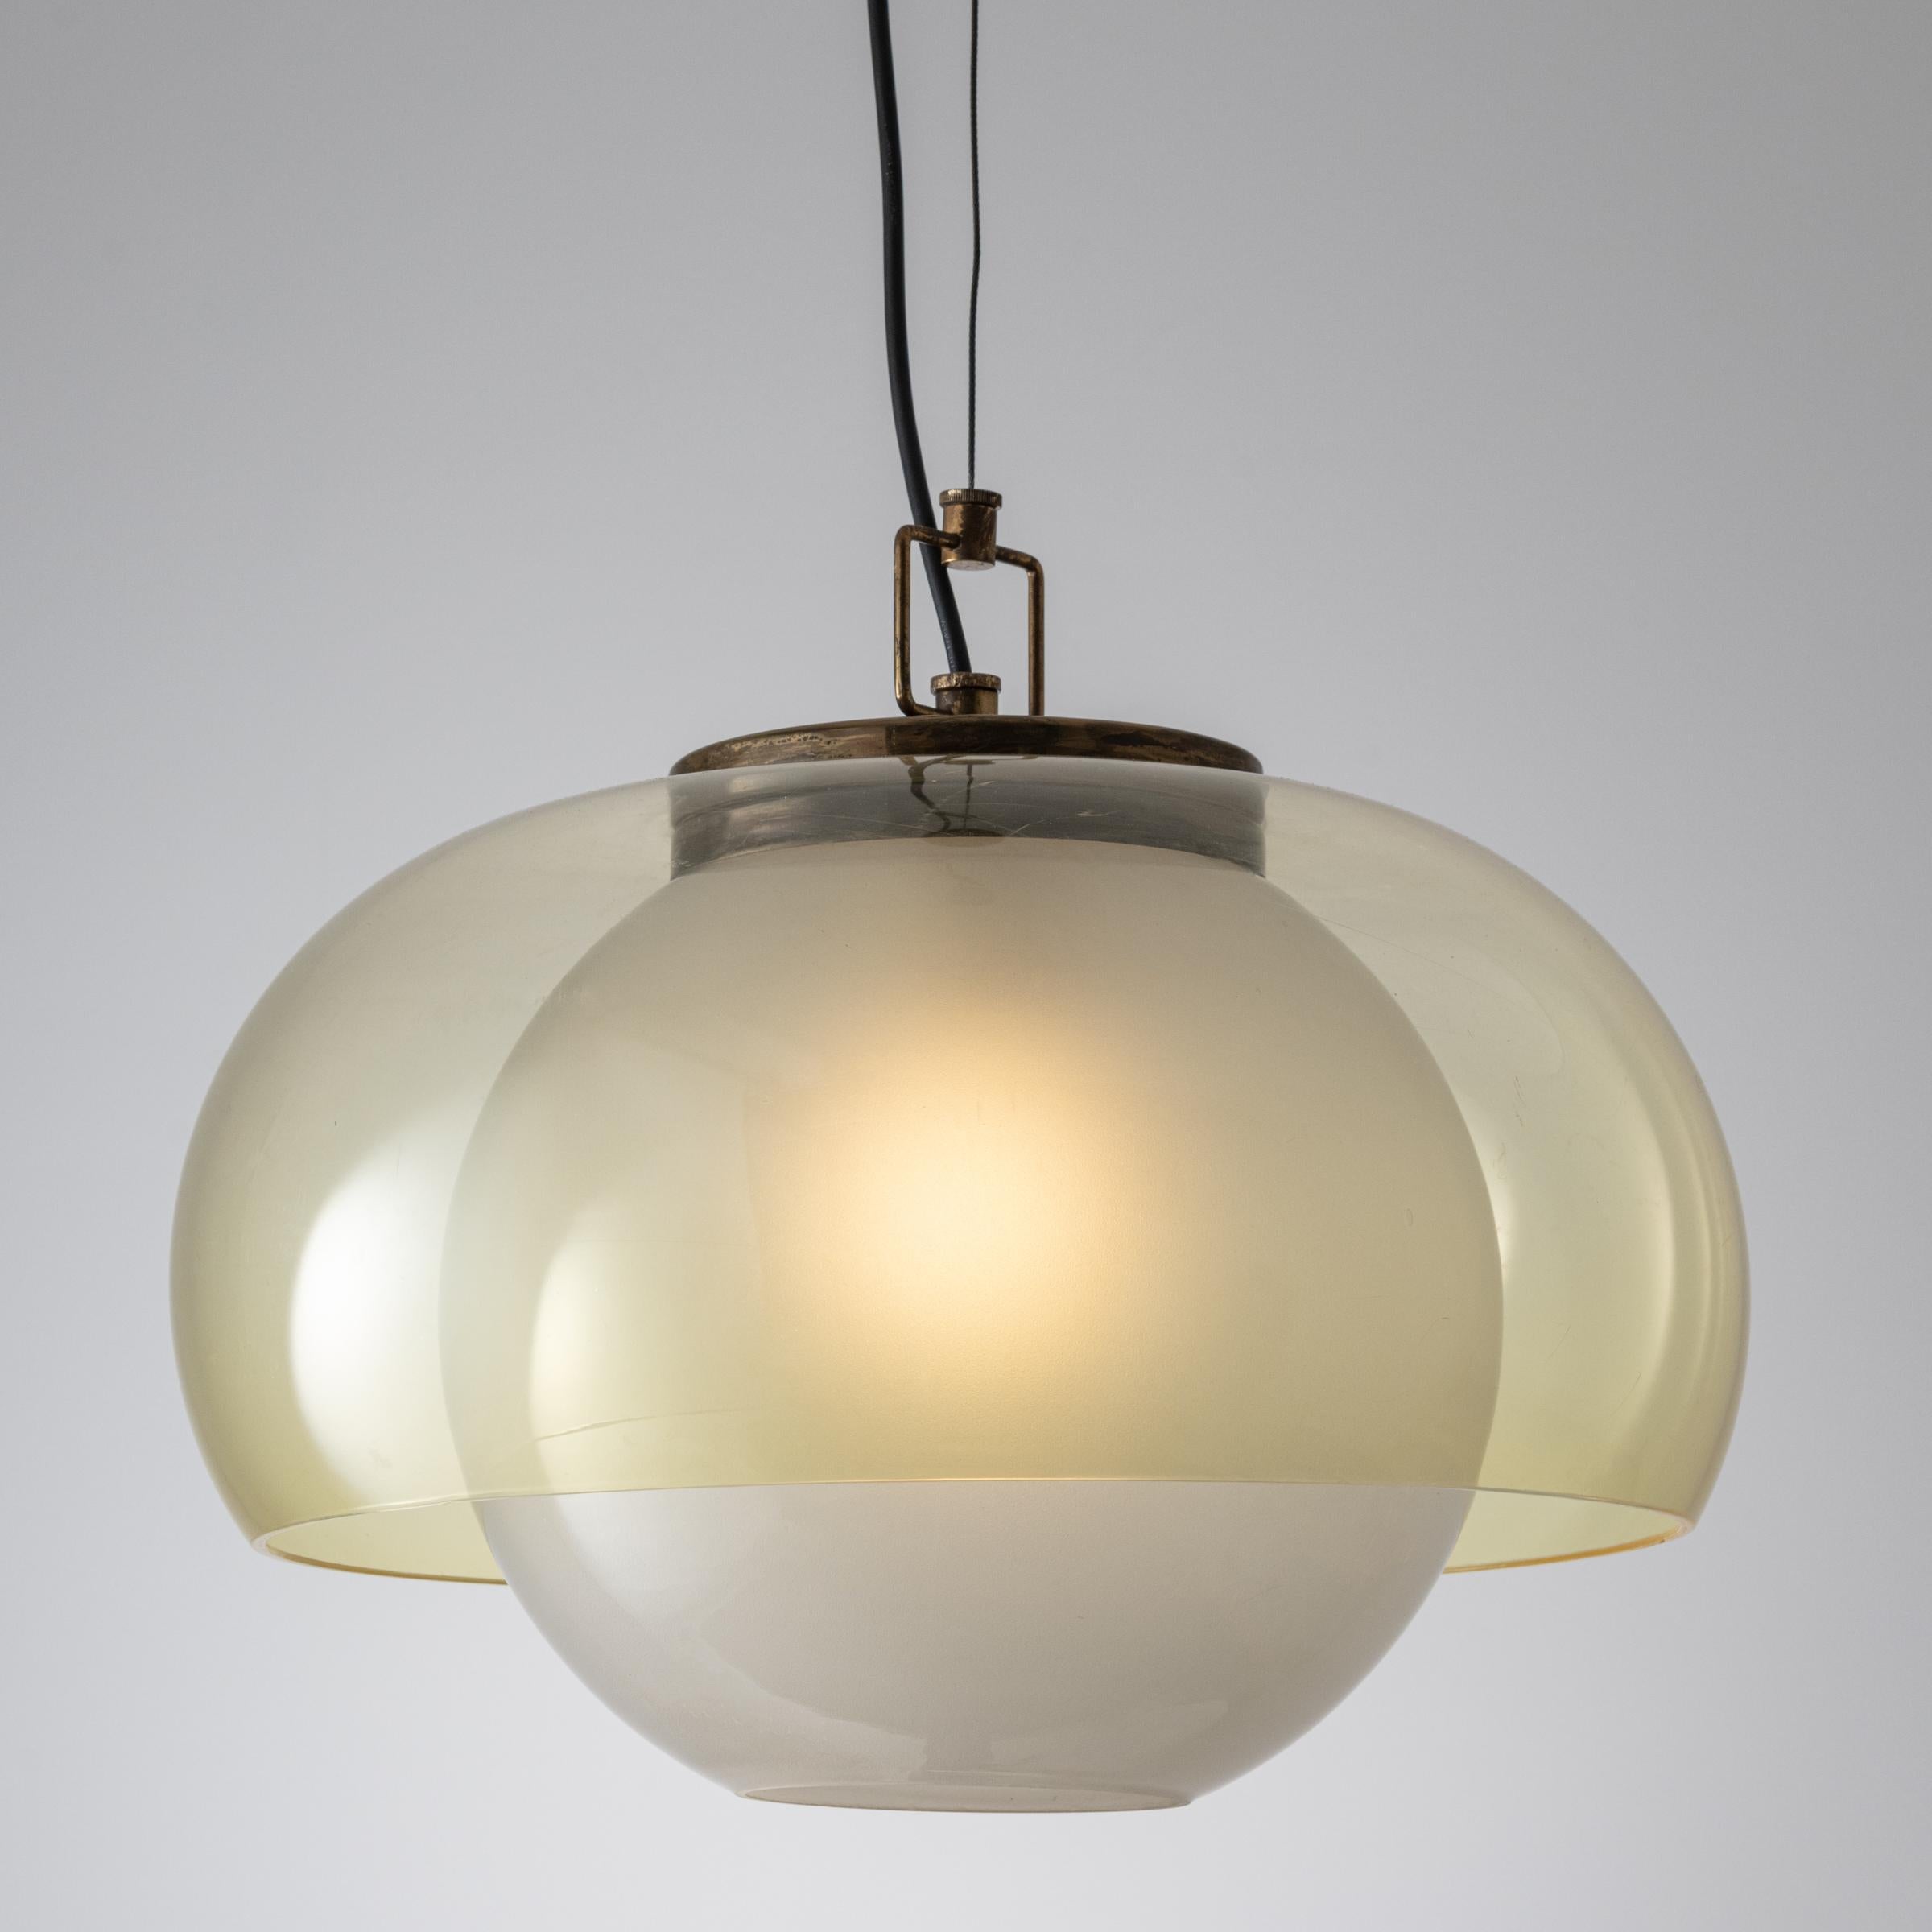 Ceiling Light by Giuseppe Ostuni for Oluce. Designed and manufactured in Italy, 1958. Plexiglas, glass, white, matted, brass. Wired for U.S. standards. Custom brass backplate. We recommend Lamping: 120v 1 Qty E27 socket w/ 60w frosted bulb. Bulb not